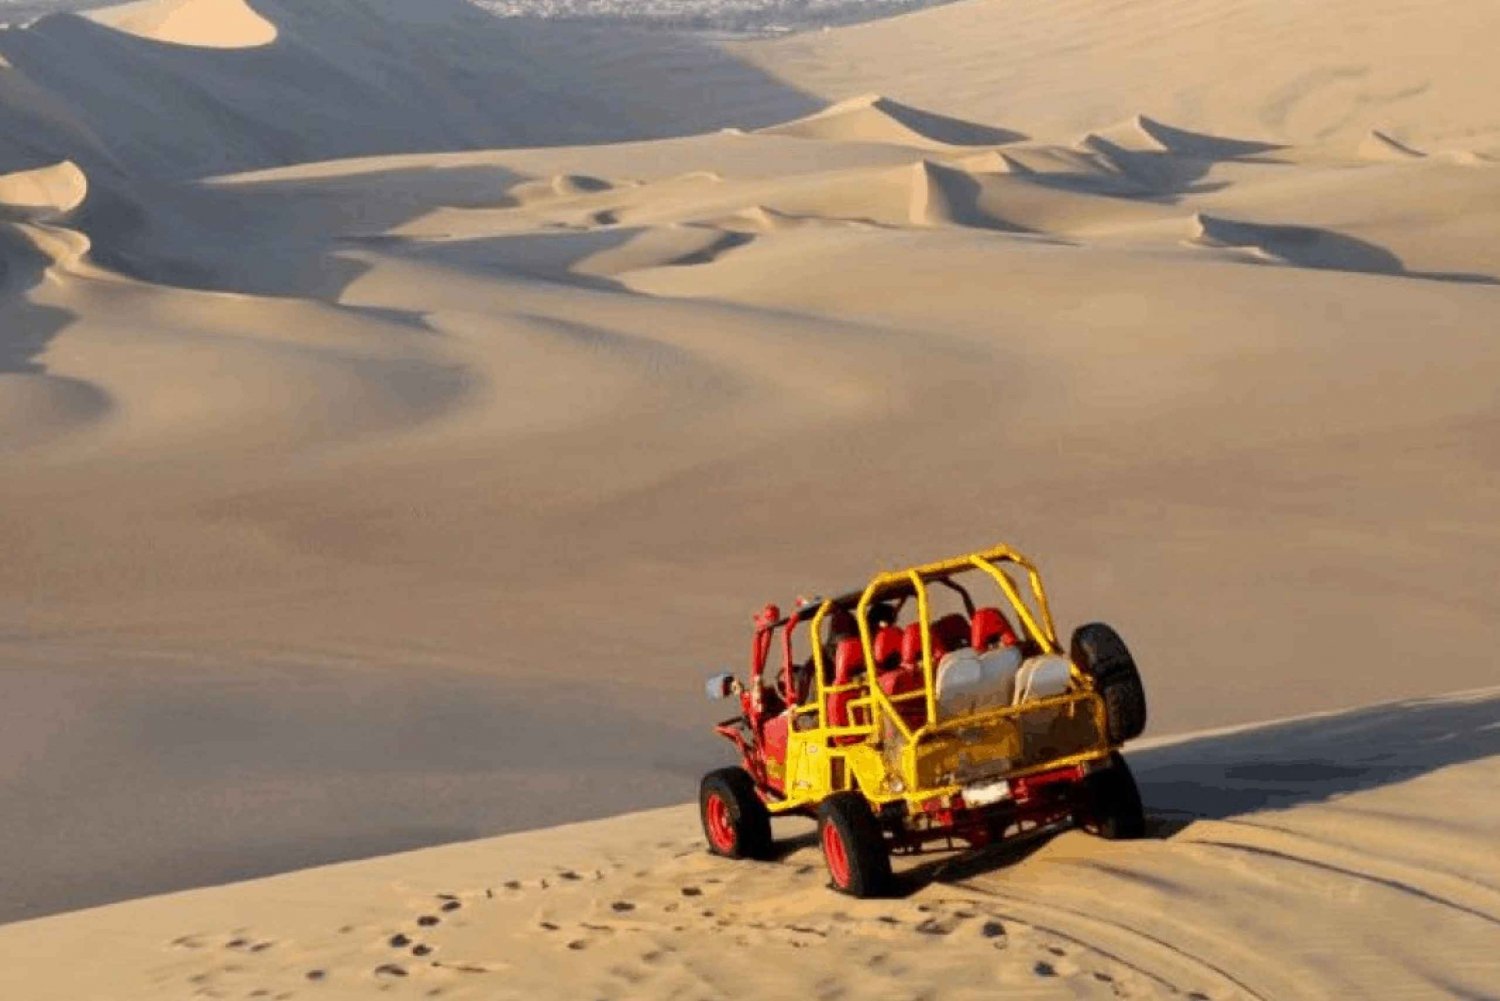 From Huacachina: Sunset + Sandboard and Buggy in the Dunes